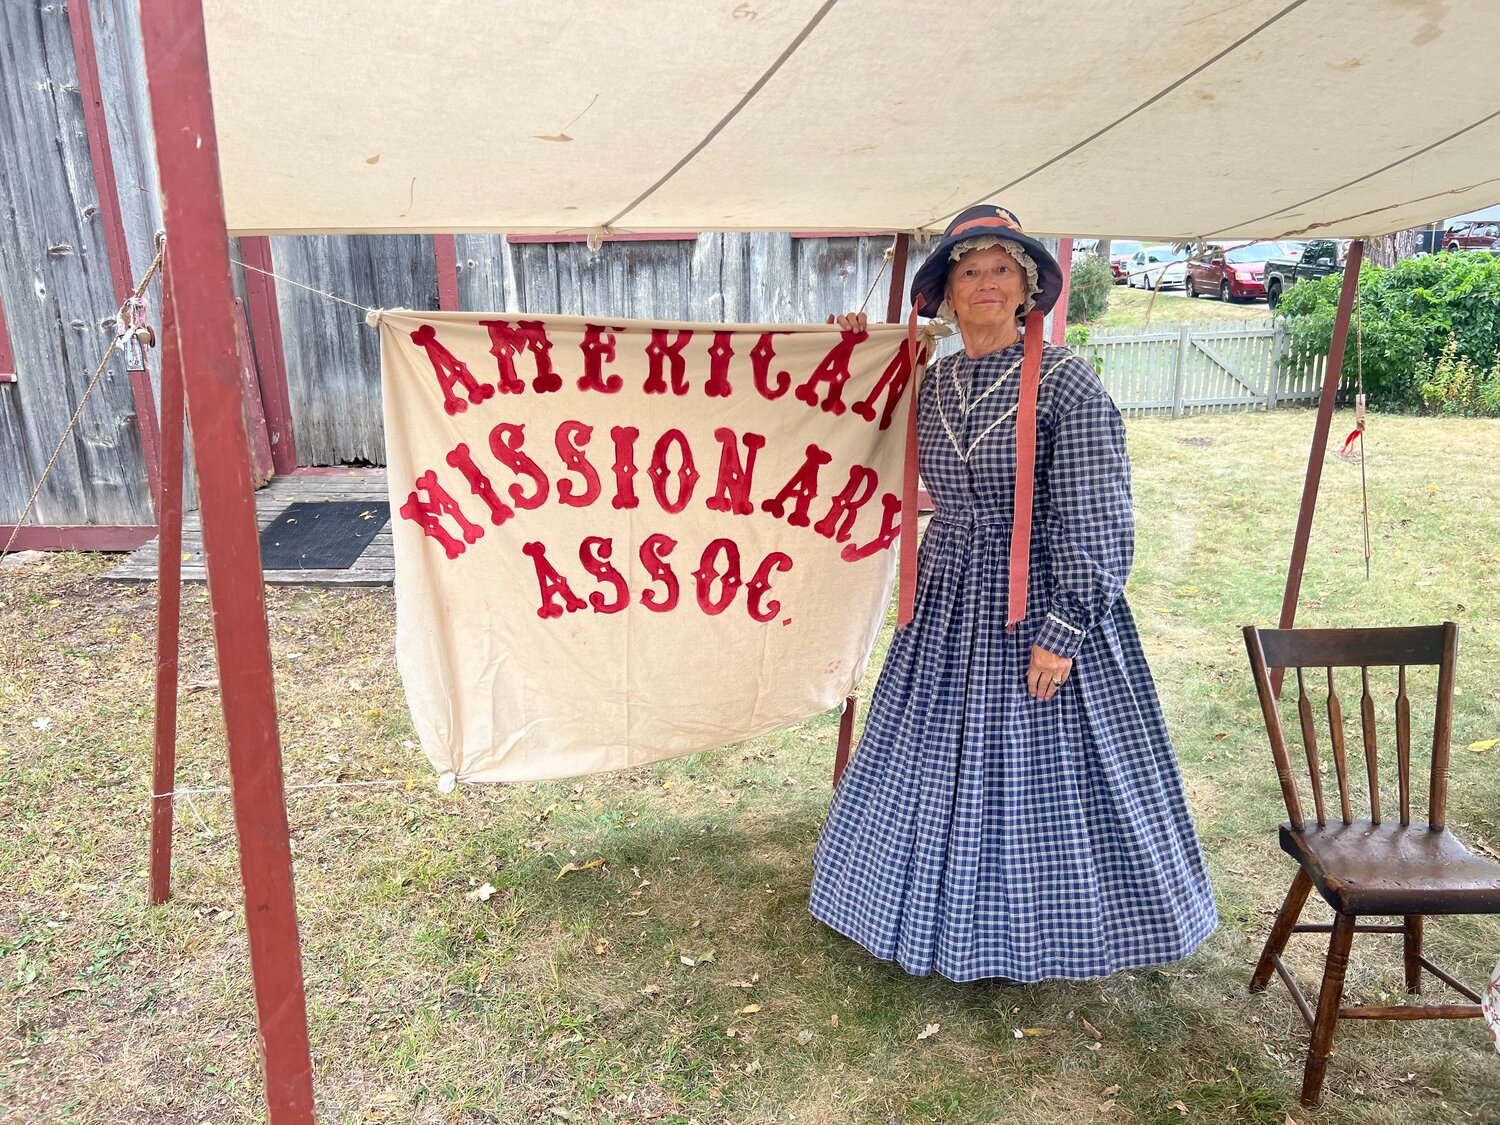 Linda Louise Bryan of Maplewood played the part of a member of the American Missionary Association, which sponsored missions in Canada for those who had escaped via the Underground Railway. The organization was critical in teaching reading and independent living skills to former slaves. Bryan’s hope is that the community continues to embrace the Civil War Weekend for years to come. “This is one of the best ways for families to experience living history,” she said.